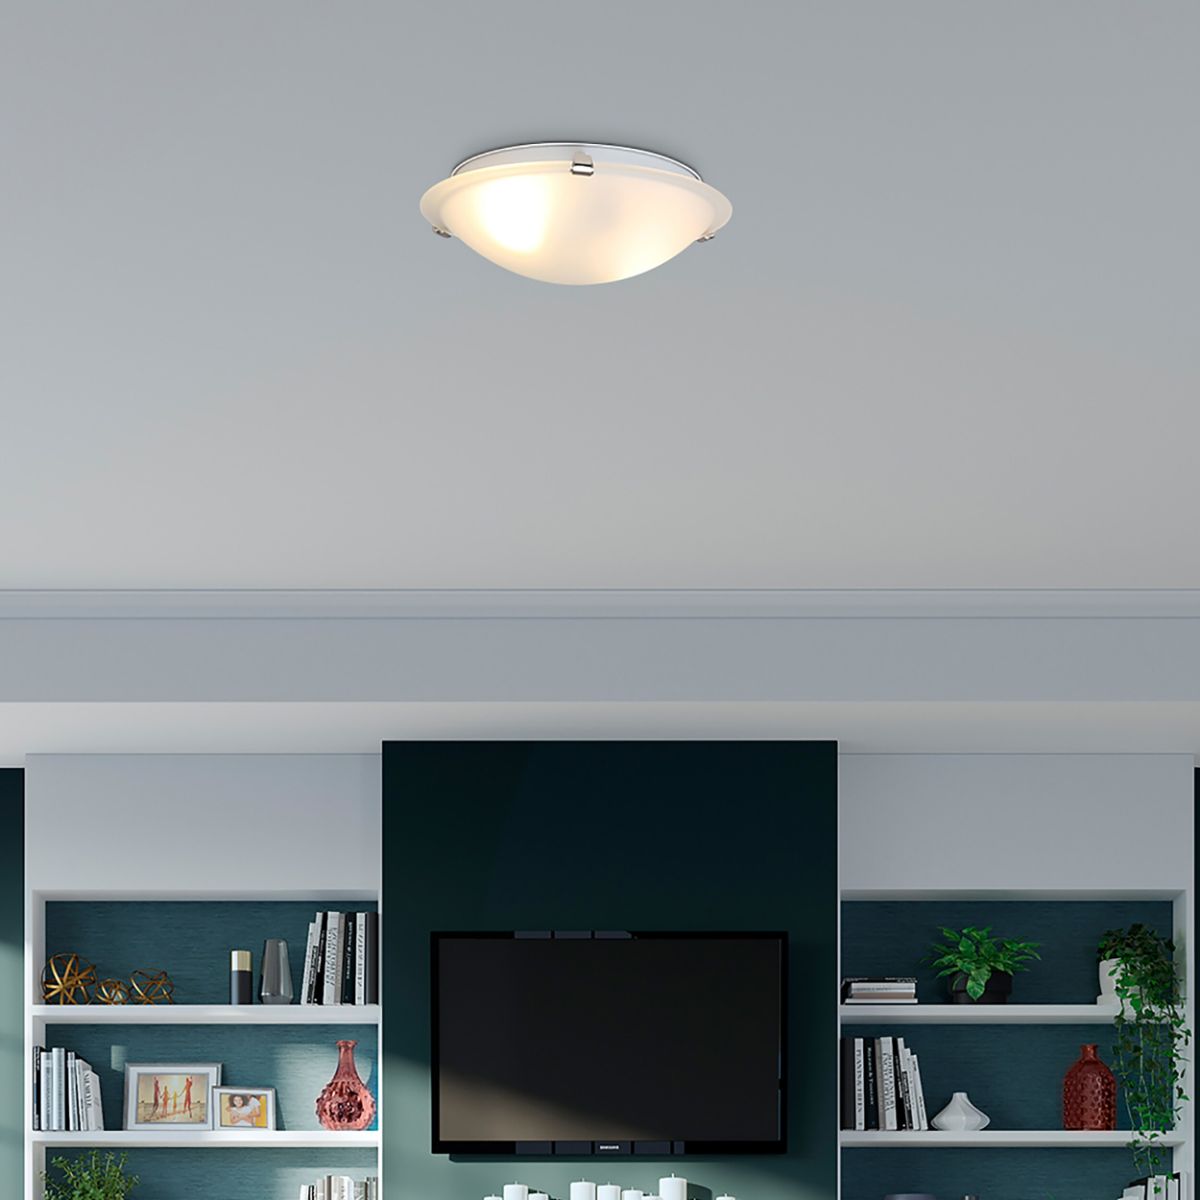 Clip LED Ceiling Puff Light with Satin Etched glass diffuser Brushed Nickel finish - Bees Lighting